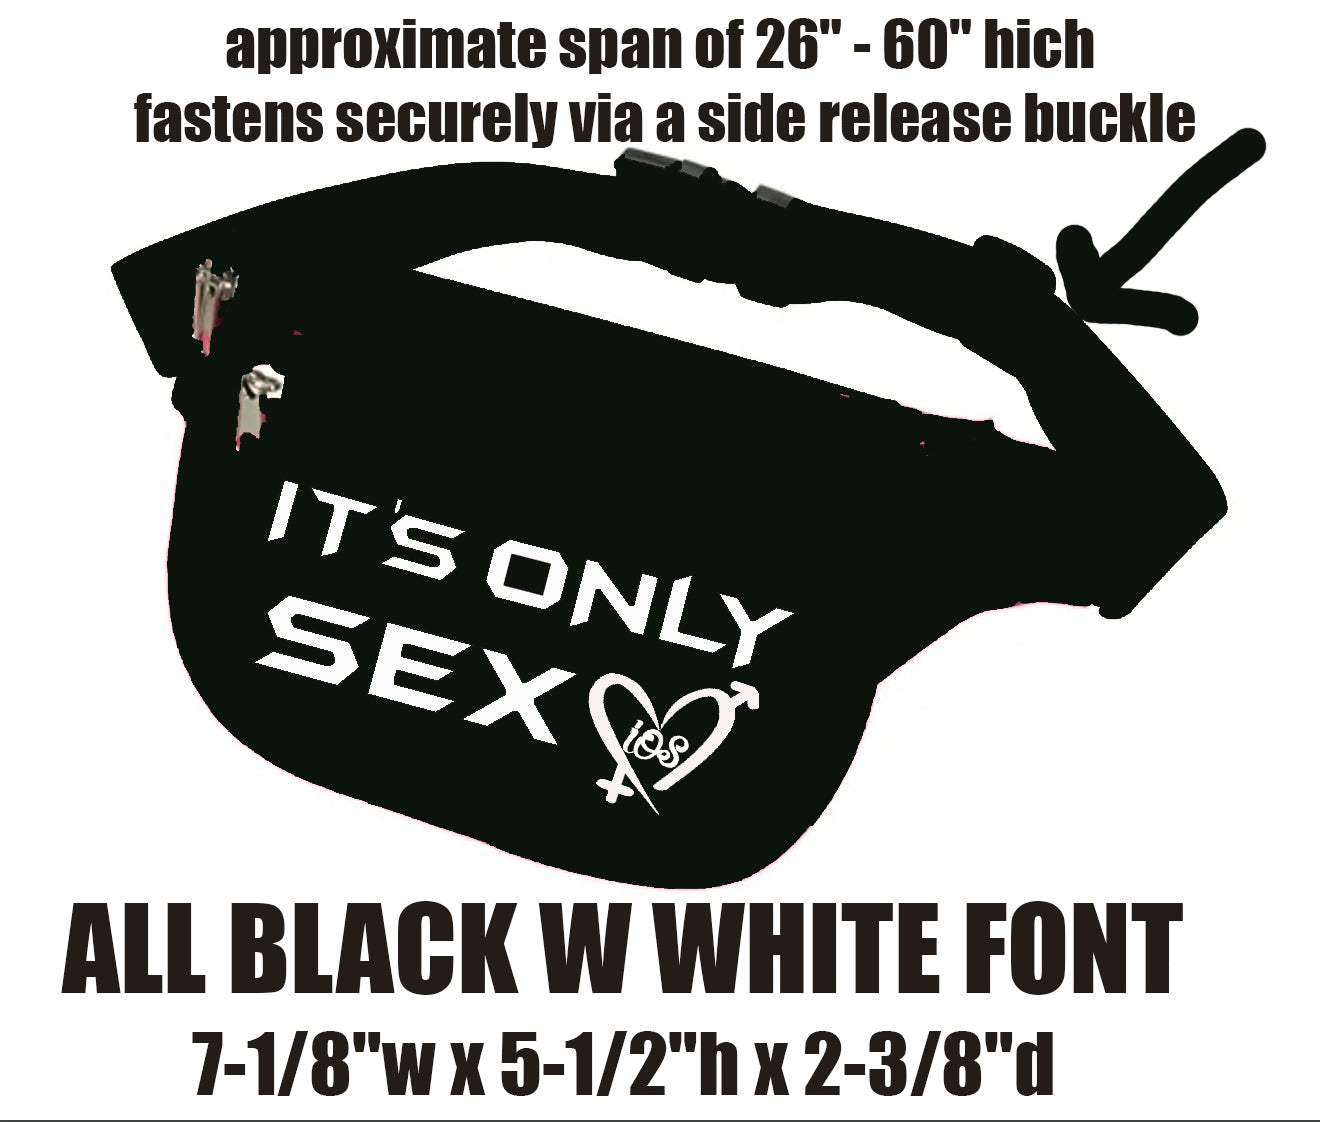 BLACK IT'S ONLY SEXY & DIRTY PERV HEAVY DUTY FANNY PACK